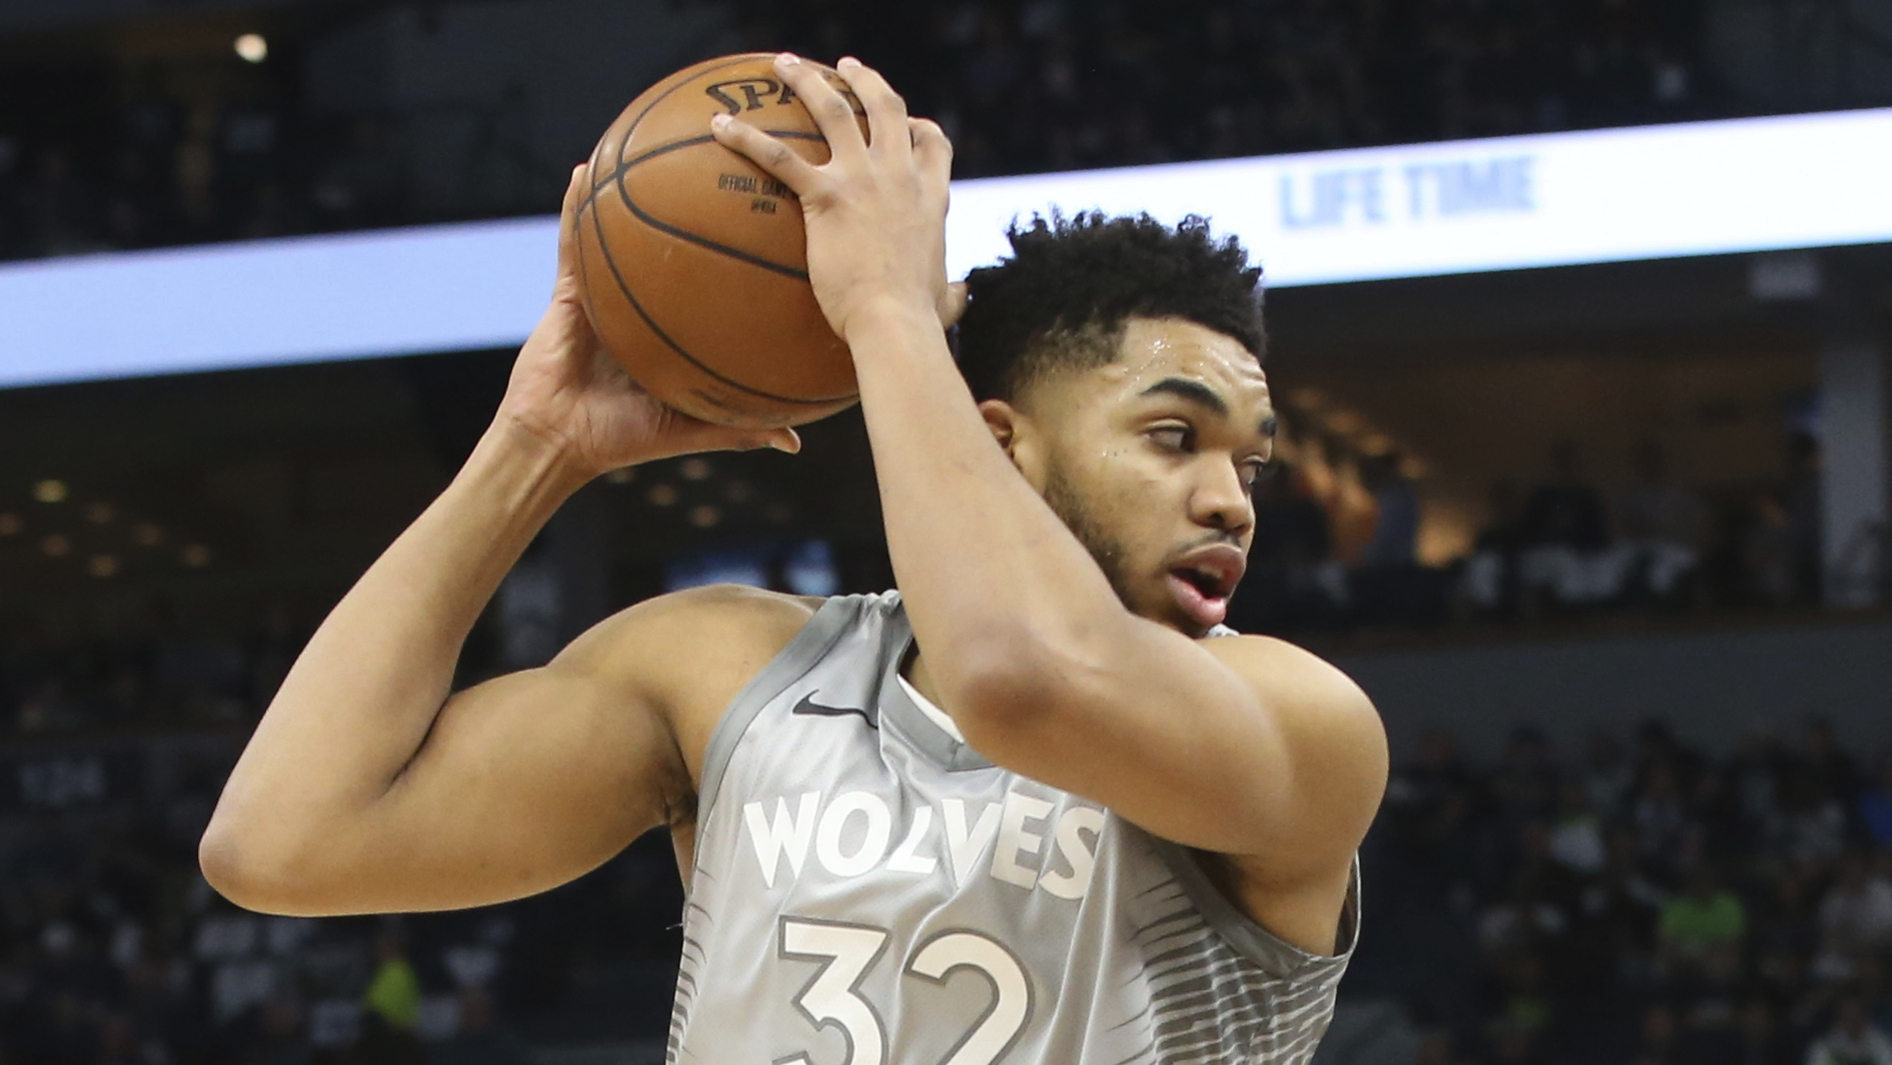 Who are Karl-Anthony Towns Parents, Karl Towns Sr. and Jacqueline